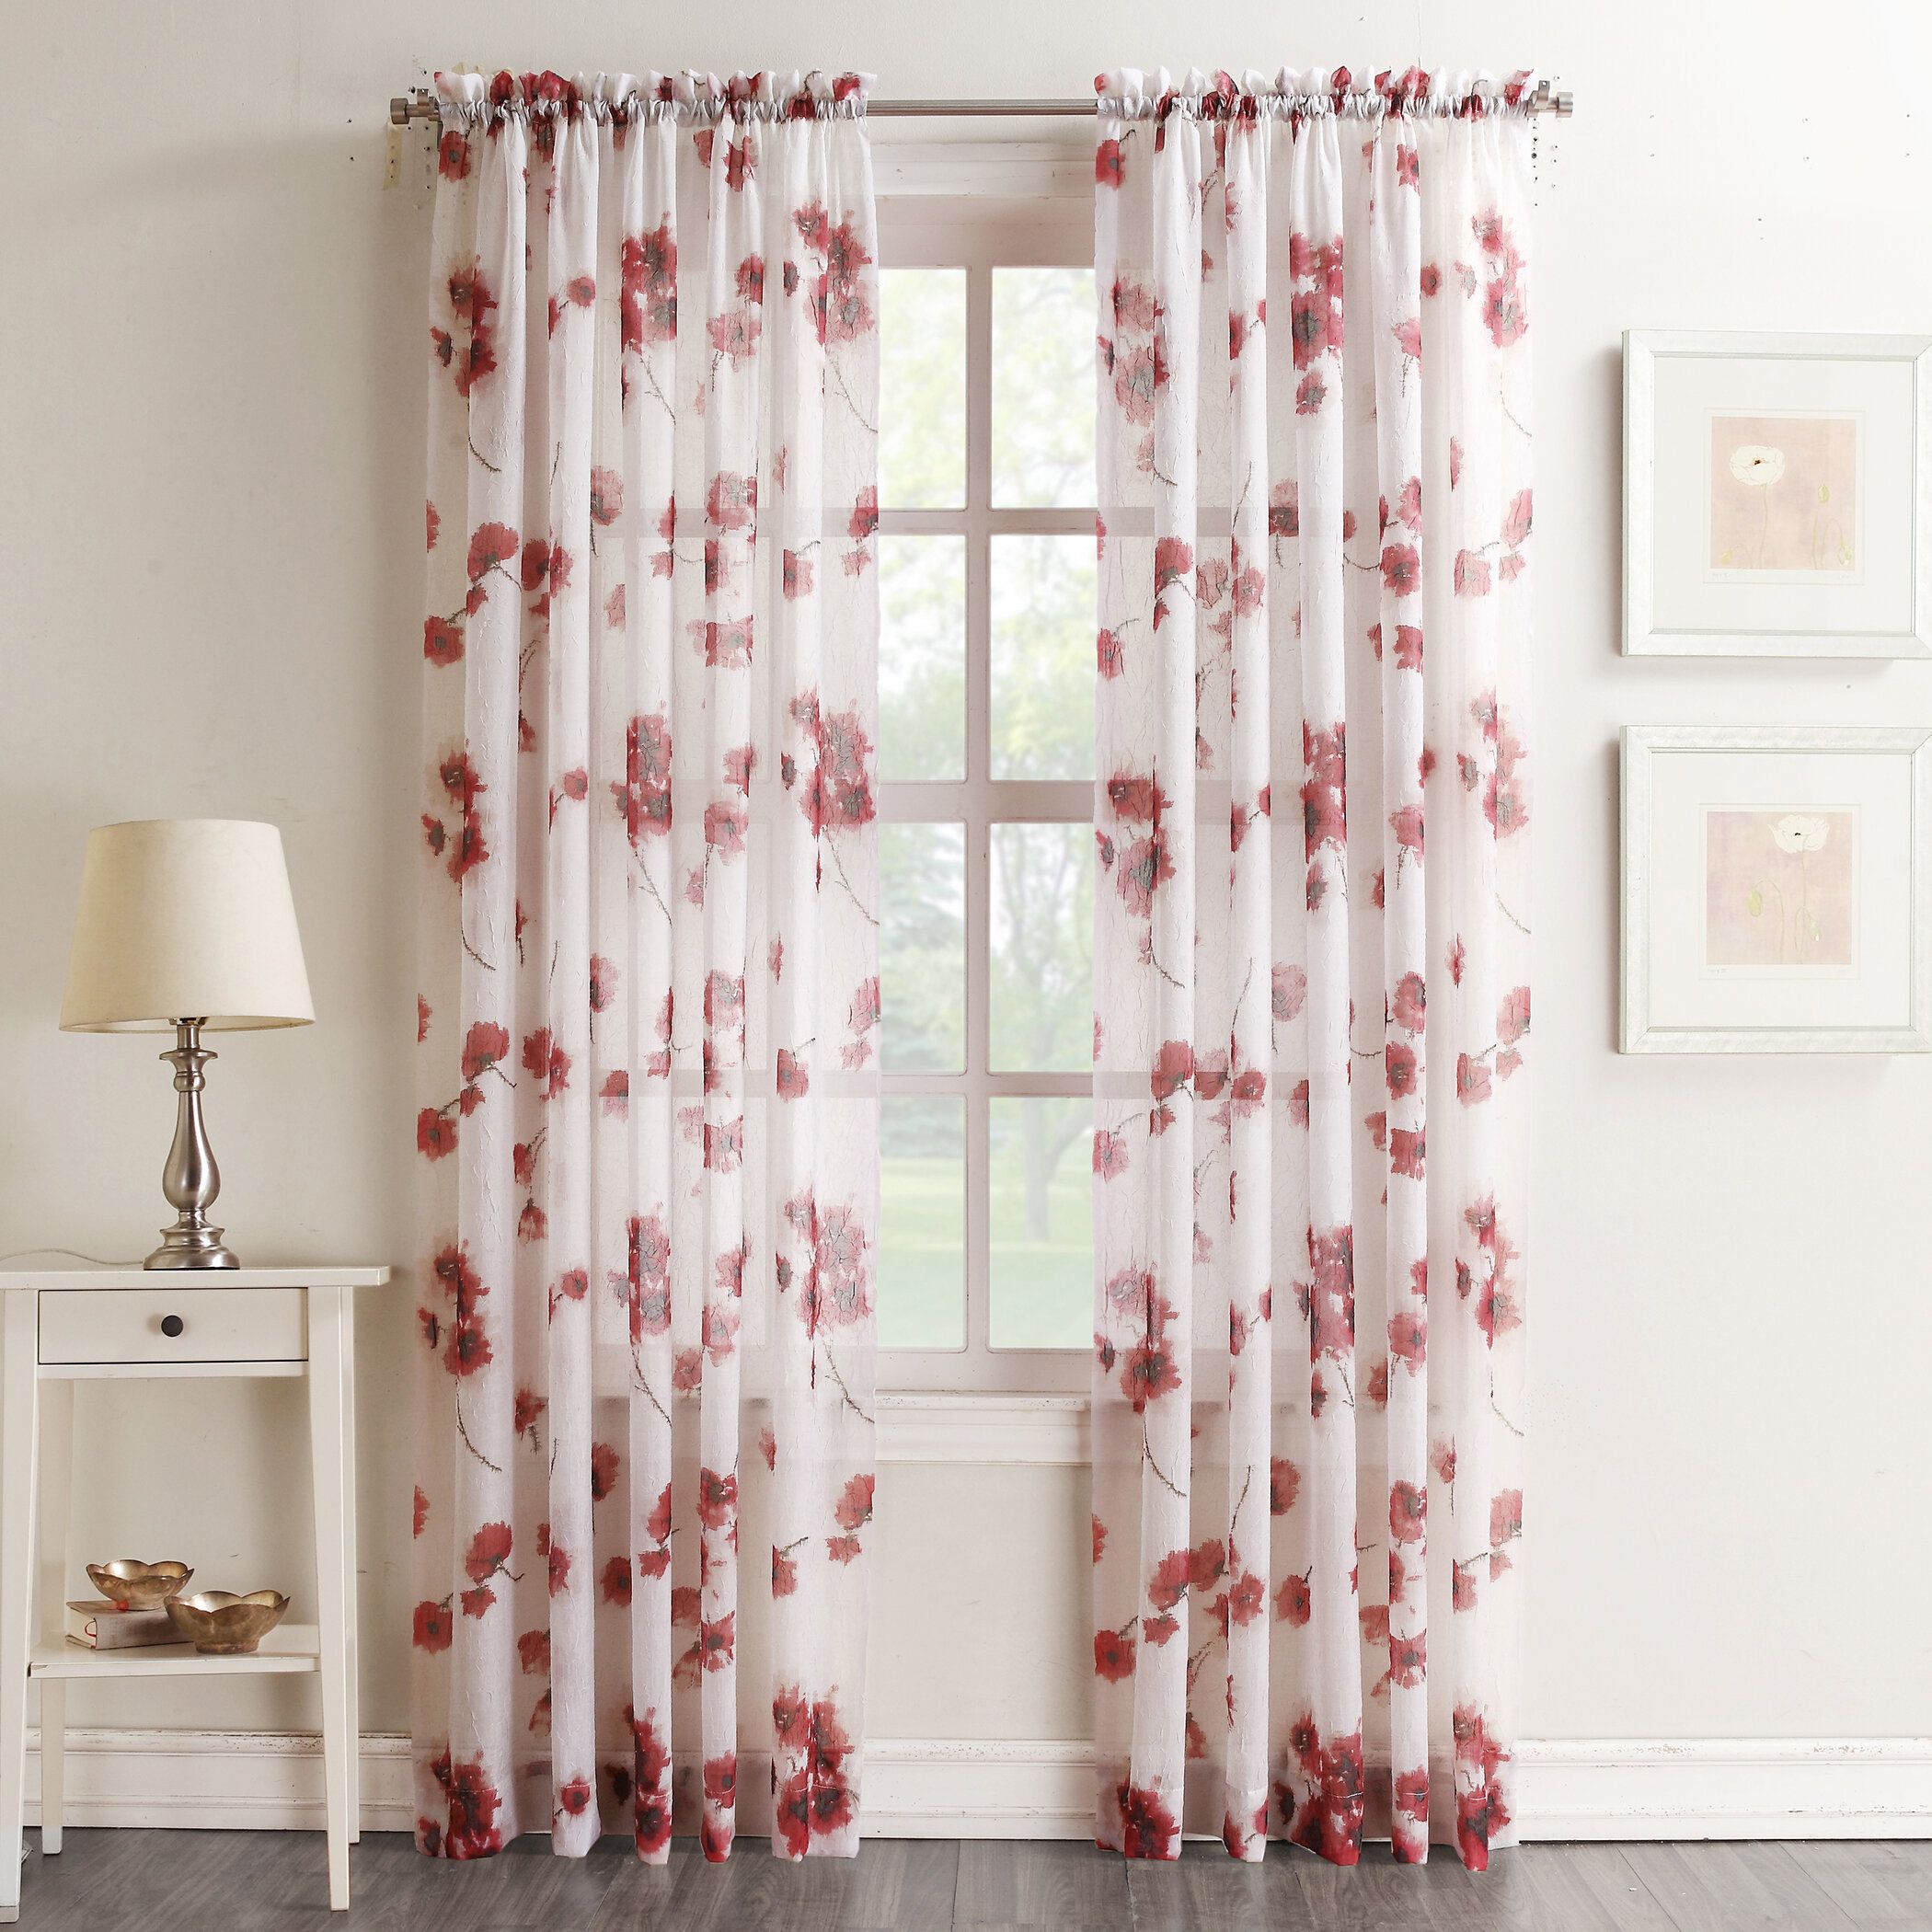 Alexandre Nature/floral Sheer Rod Pocket Single Curtain Panel Inside Wavy Leaves Embroidered Sheer Extra Wide Grommet Curtain Panels (View 29 of 30)